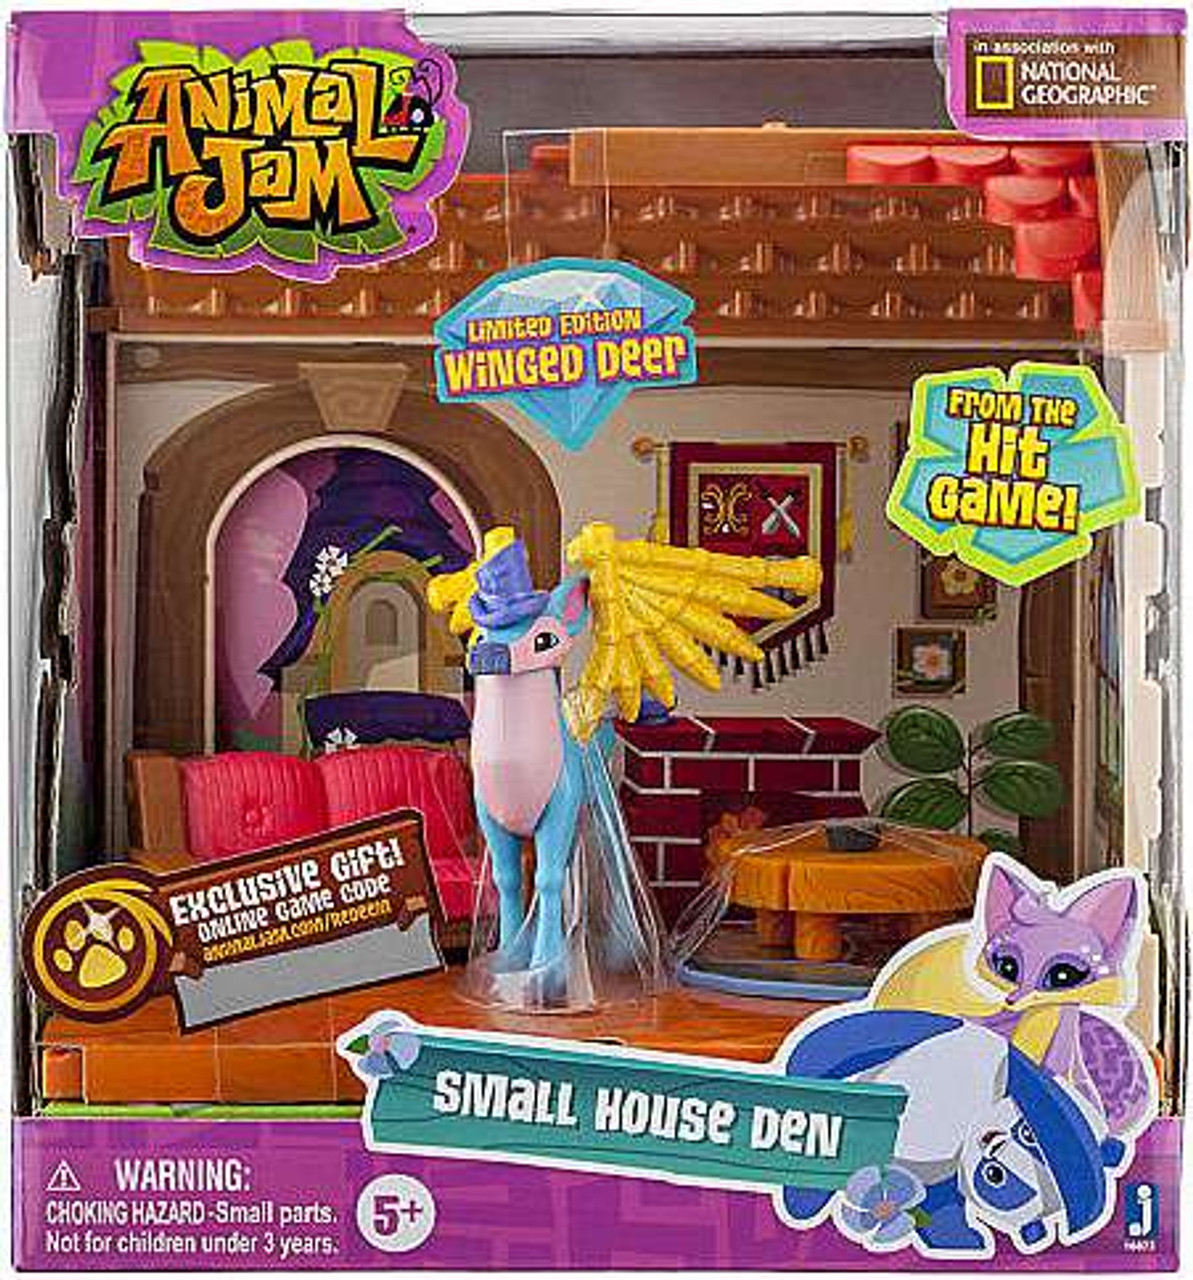 Animal Jam Small House Den Playset Limited Edition Winged Deer Damaged Package Jazwares Toywiz - trading roblox limited for animal jam items